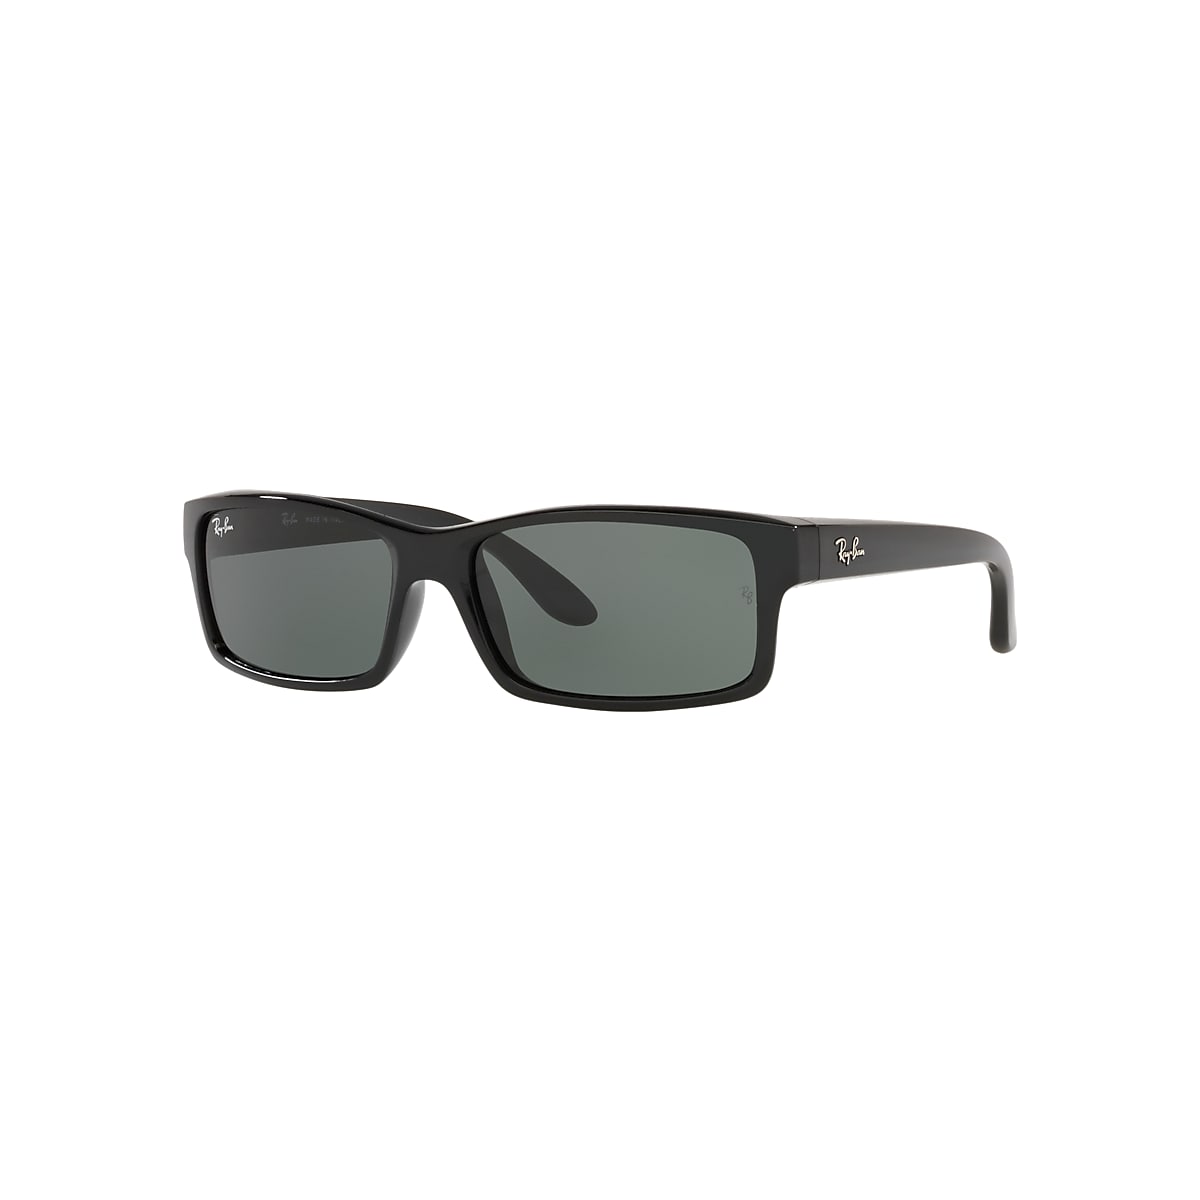 Rb4151 Sunglasses in Black and Green | Ray-Ban®